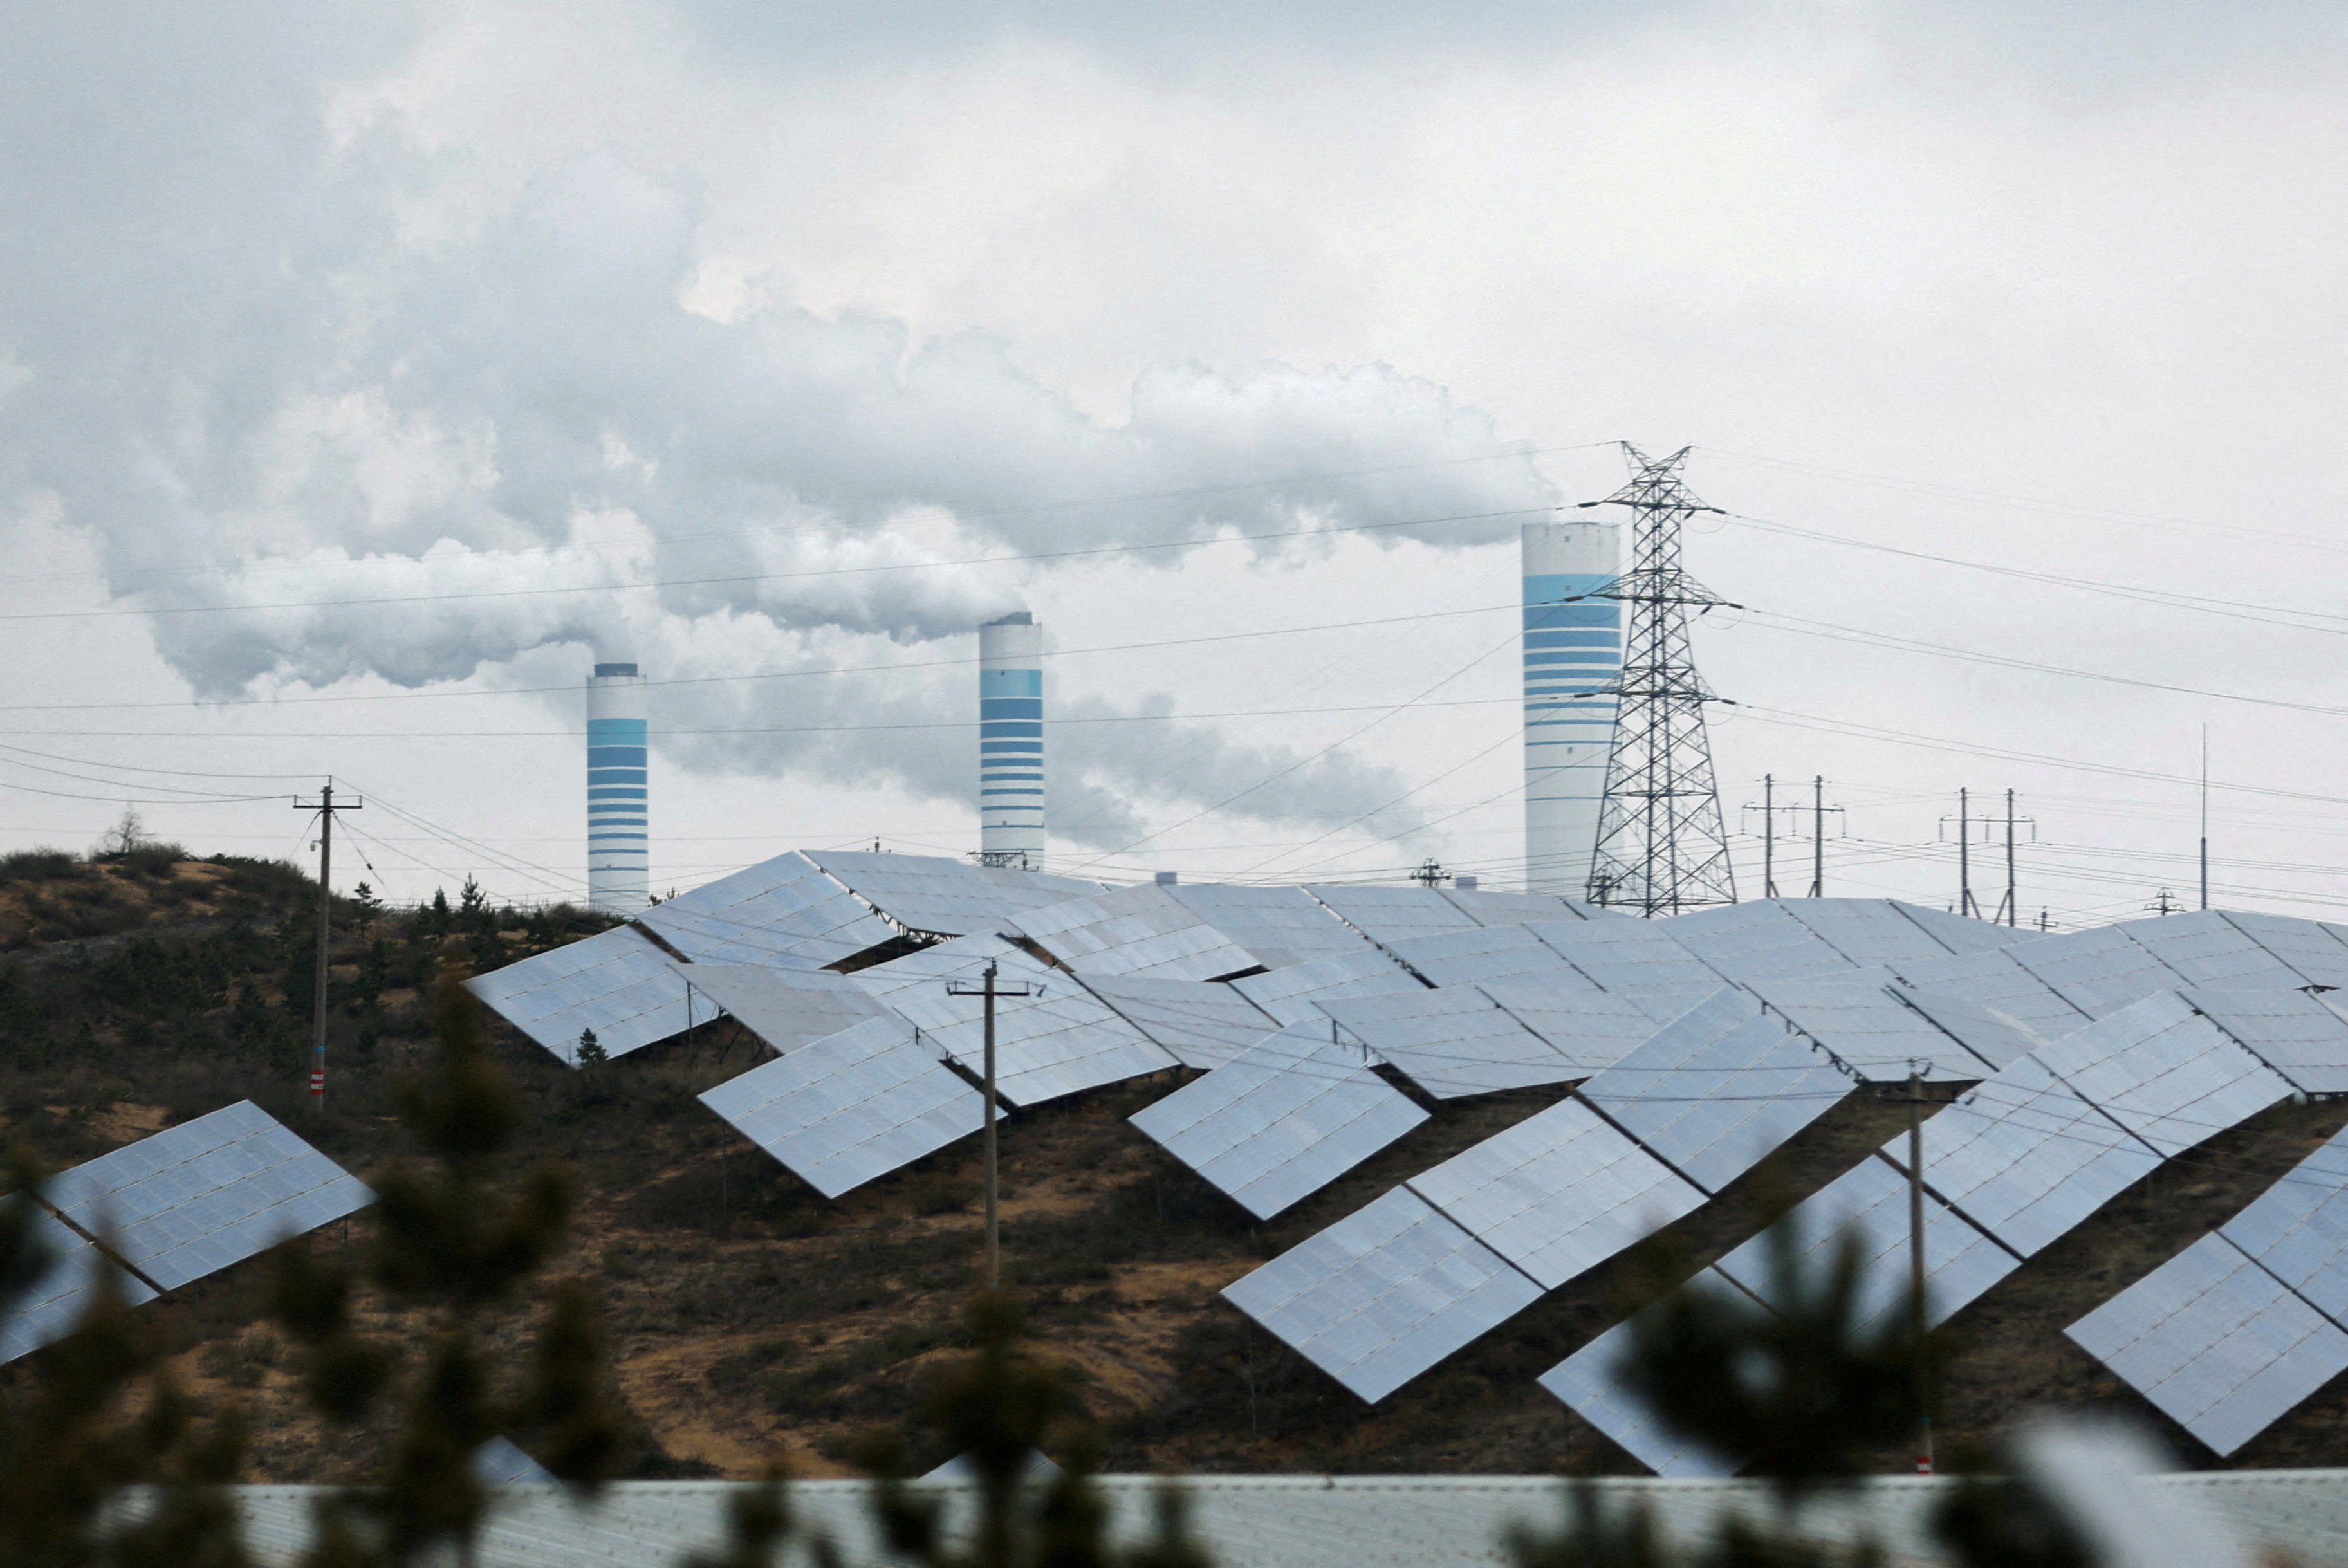 China, the world’s largest greenhouse gas emitter, has ramped up its solar and wind manufacturing capabilities to support its 2060 net-zero emission goal. Photo: Reuters